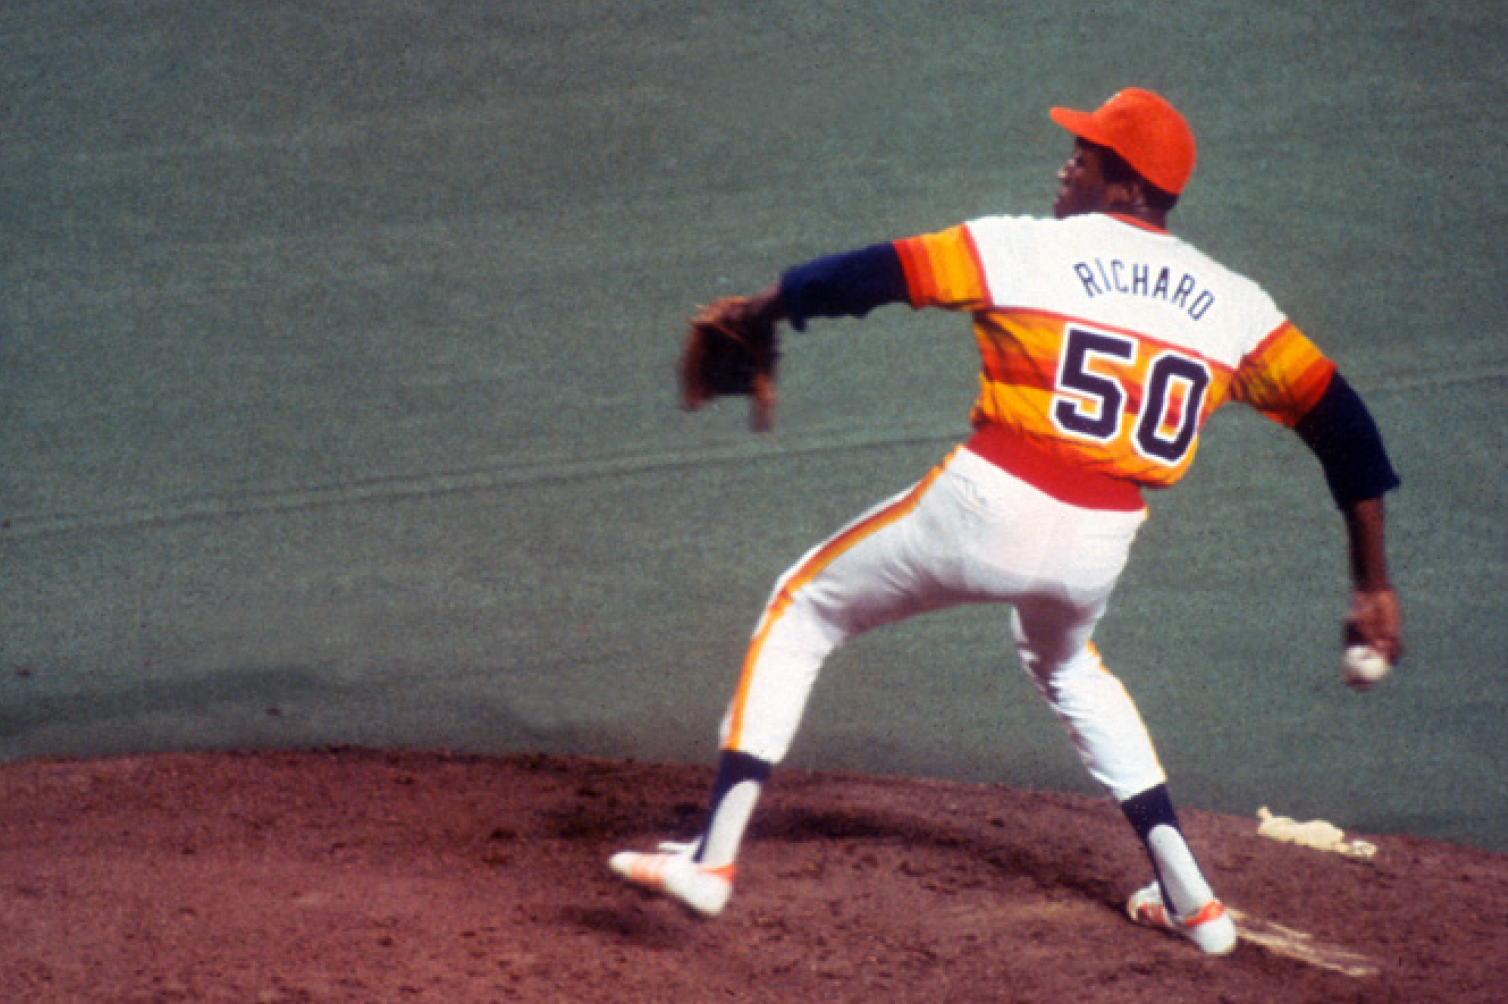 August 3, 1979: J.R. Richard strikes out 15 in complete-game